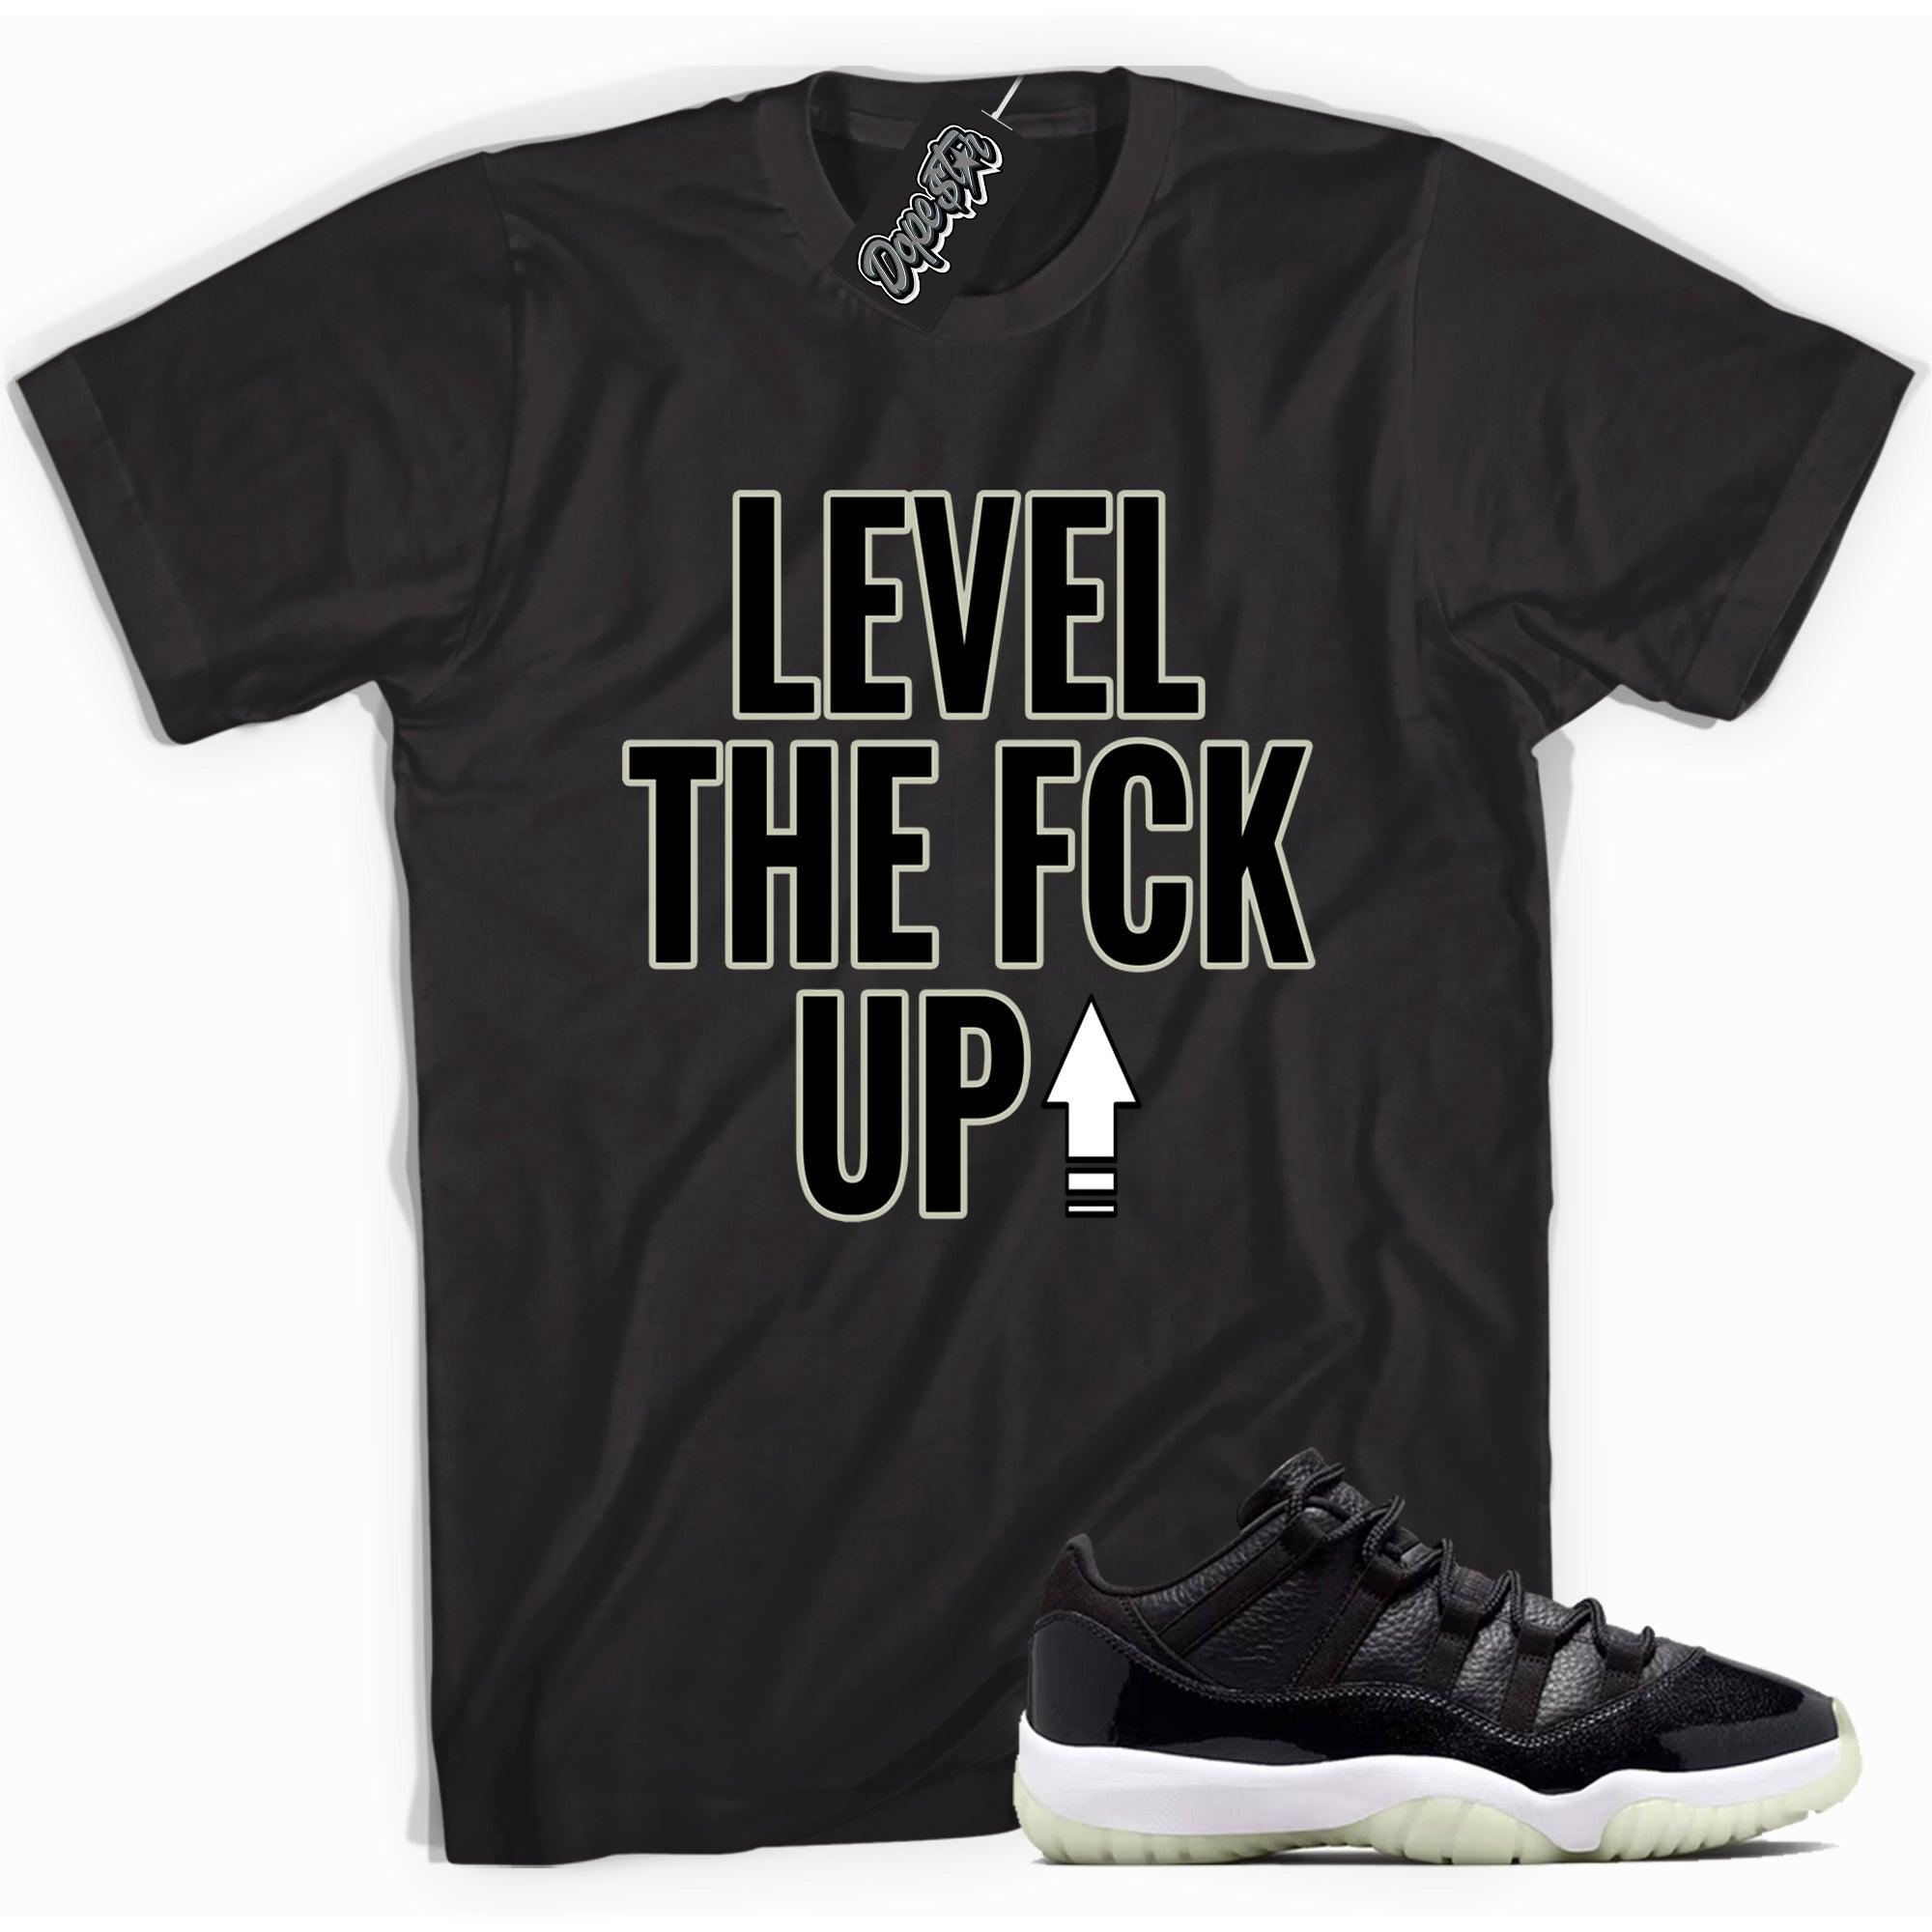 Cool black graphic tee with 'Level Up' print, that perfectly matches Air Jordan 11 Retro Low 72 10 sneakers.